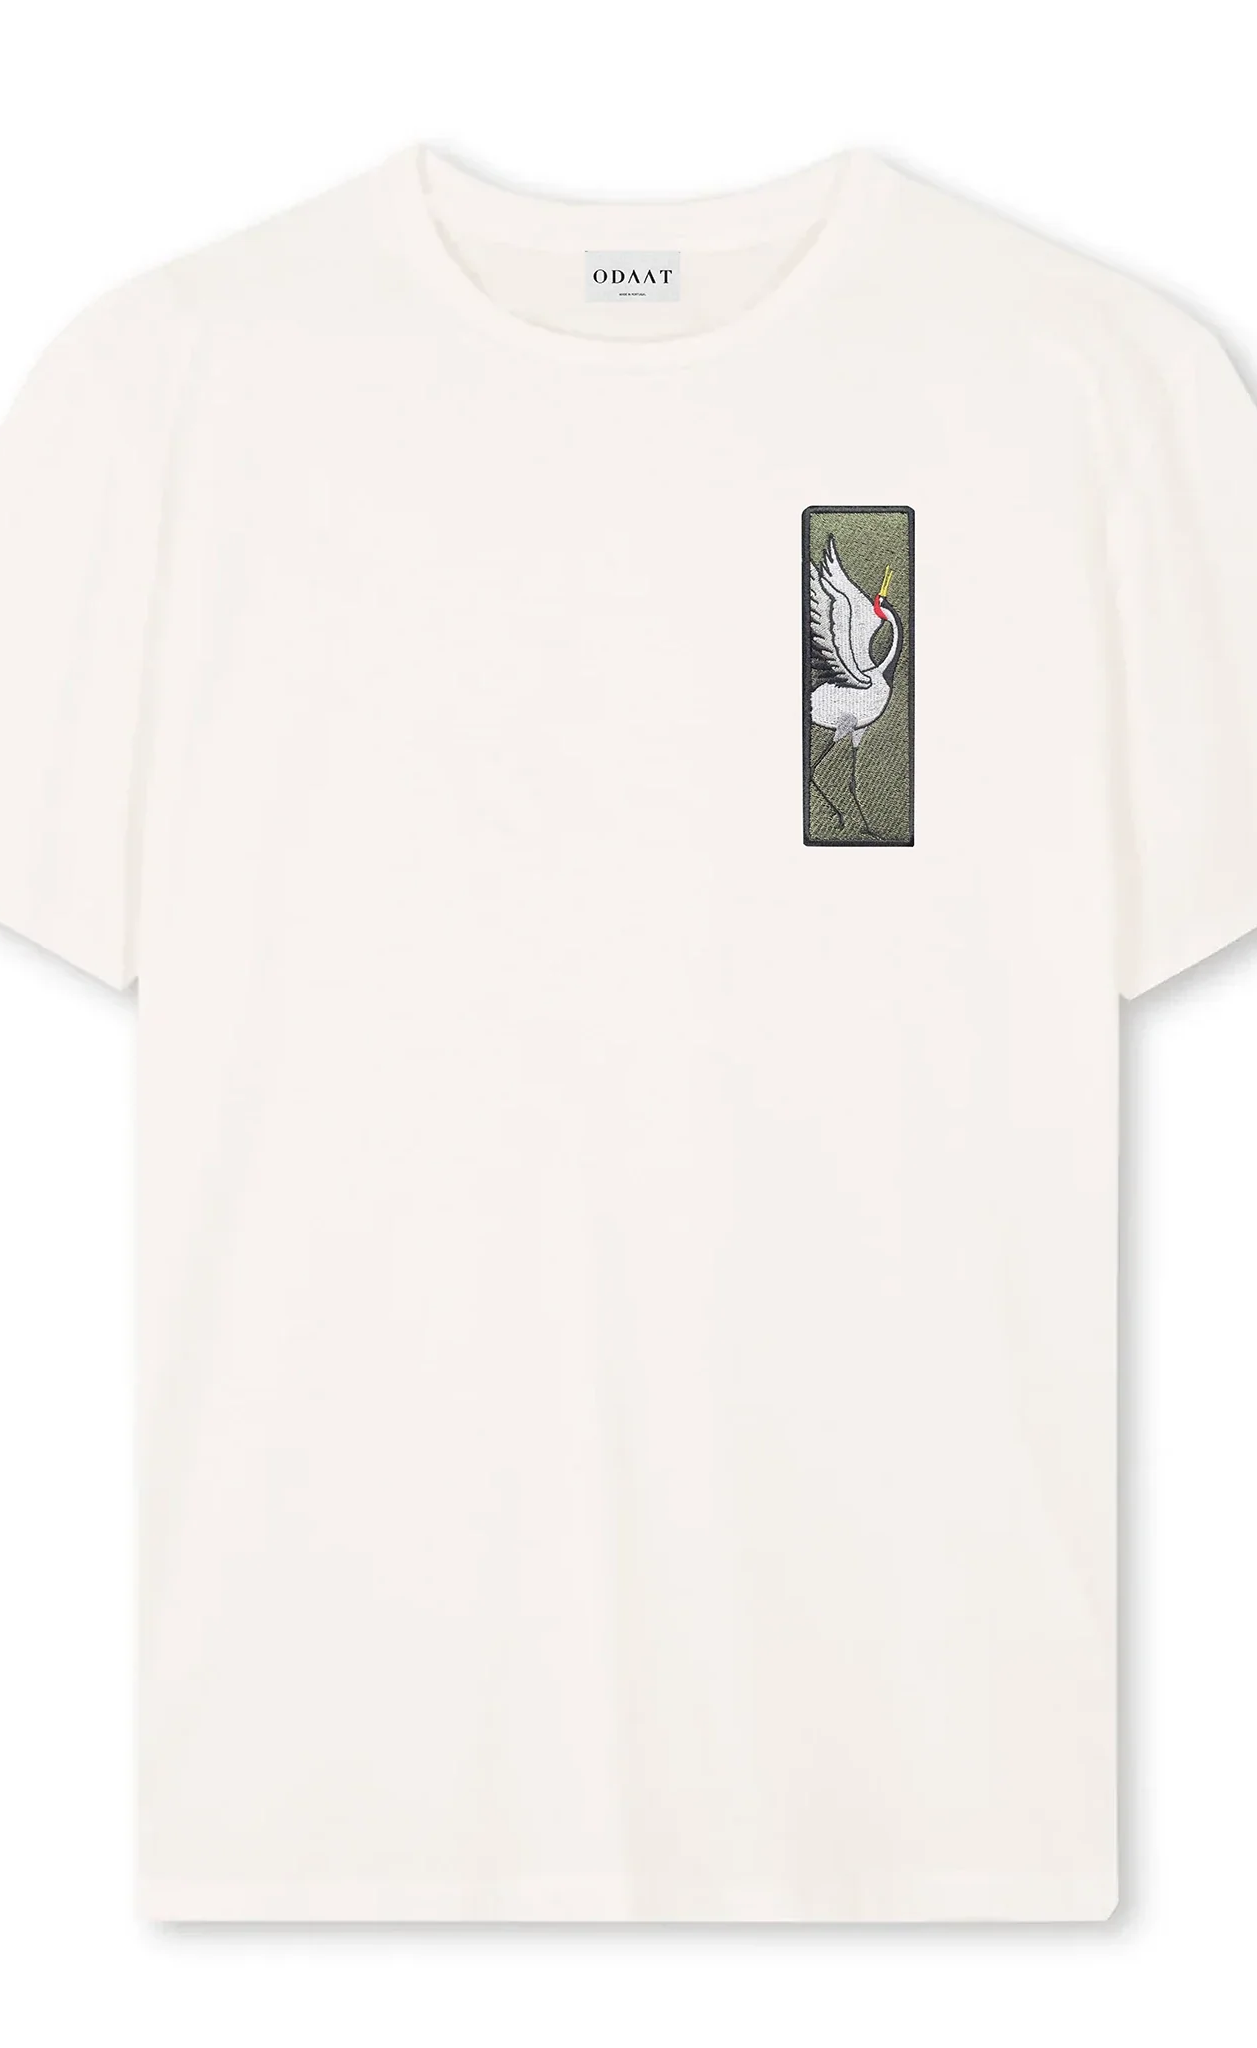 ODAAT Apparel, Origami Echo T-Shirt, Vintage White